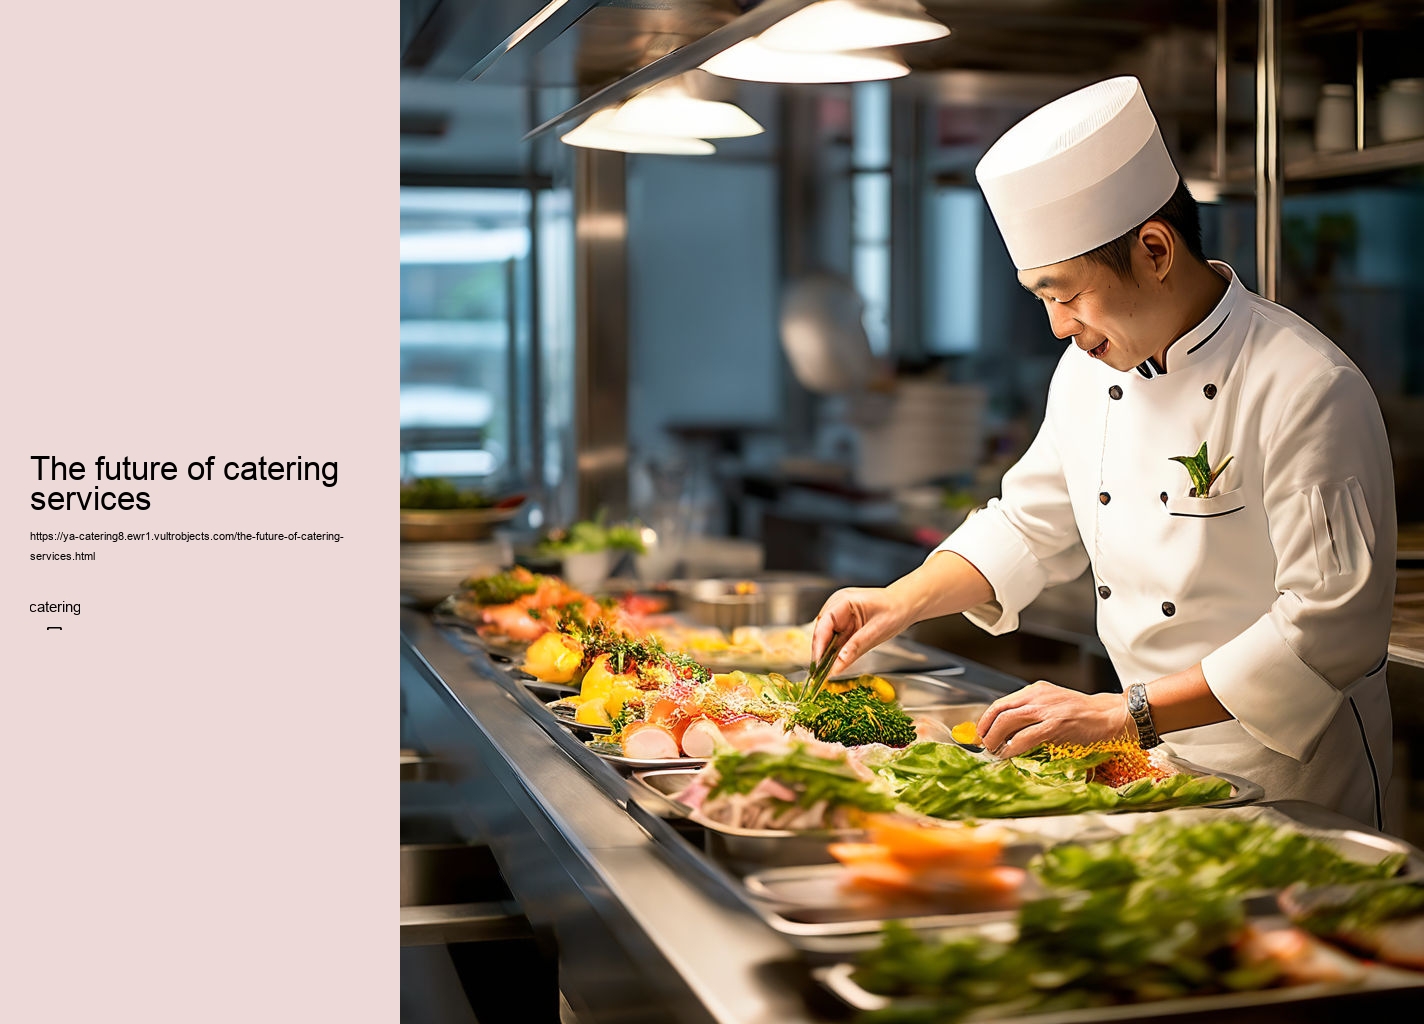 The future of catering services